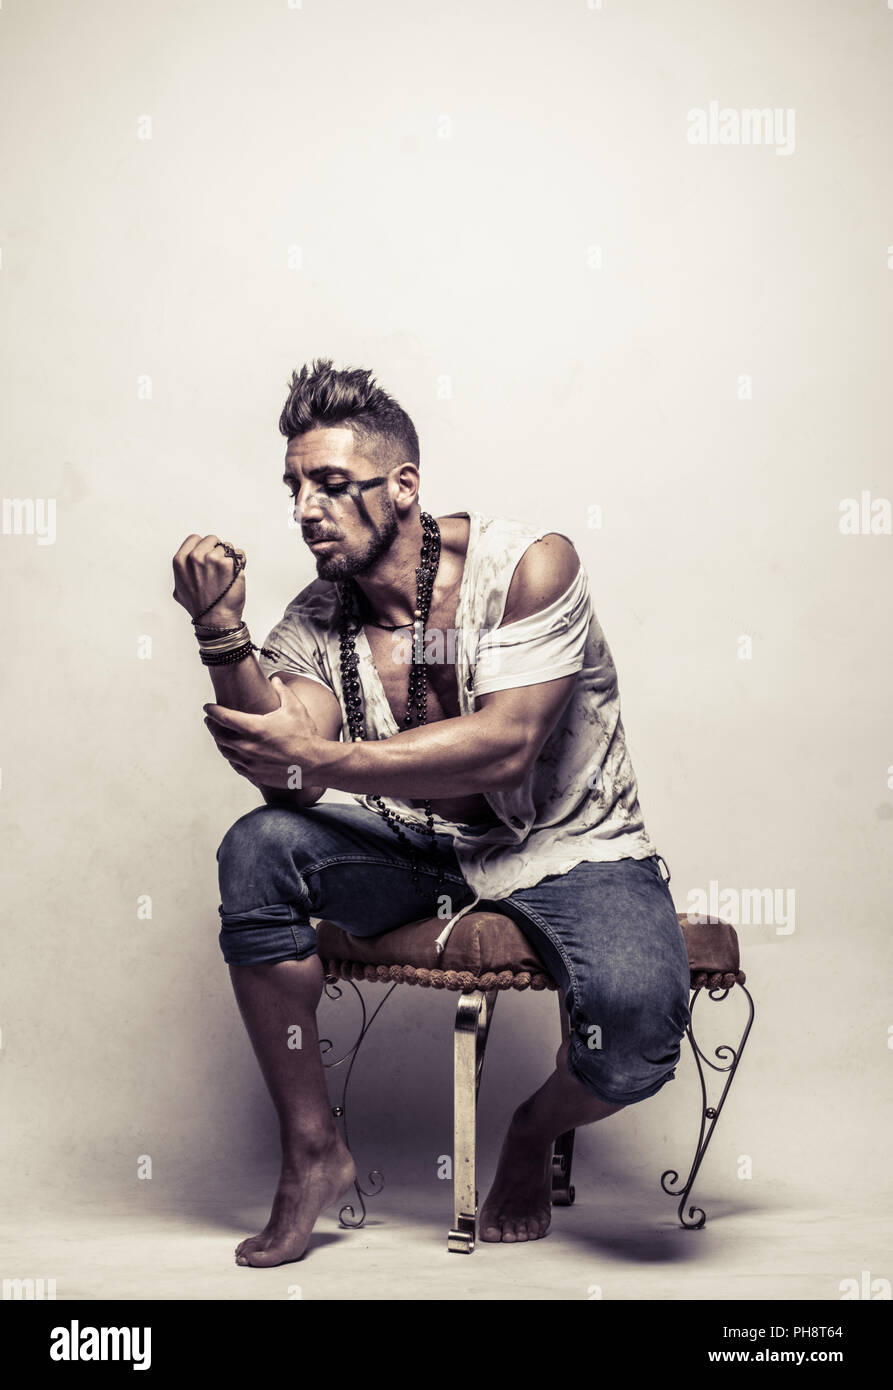 Poor Strong Young Man on a Chair Clenching Fist Stock Photo